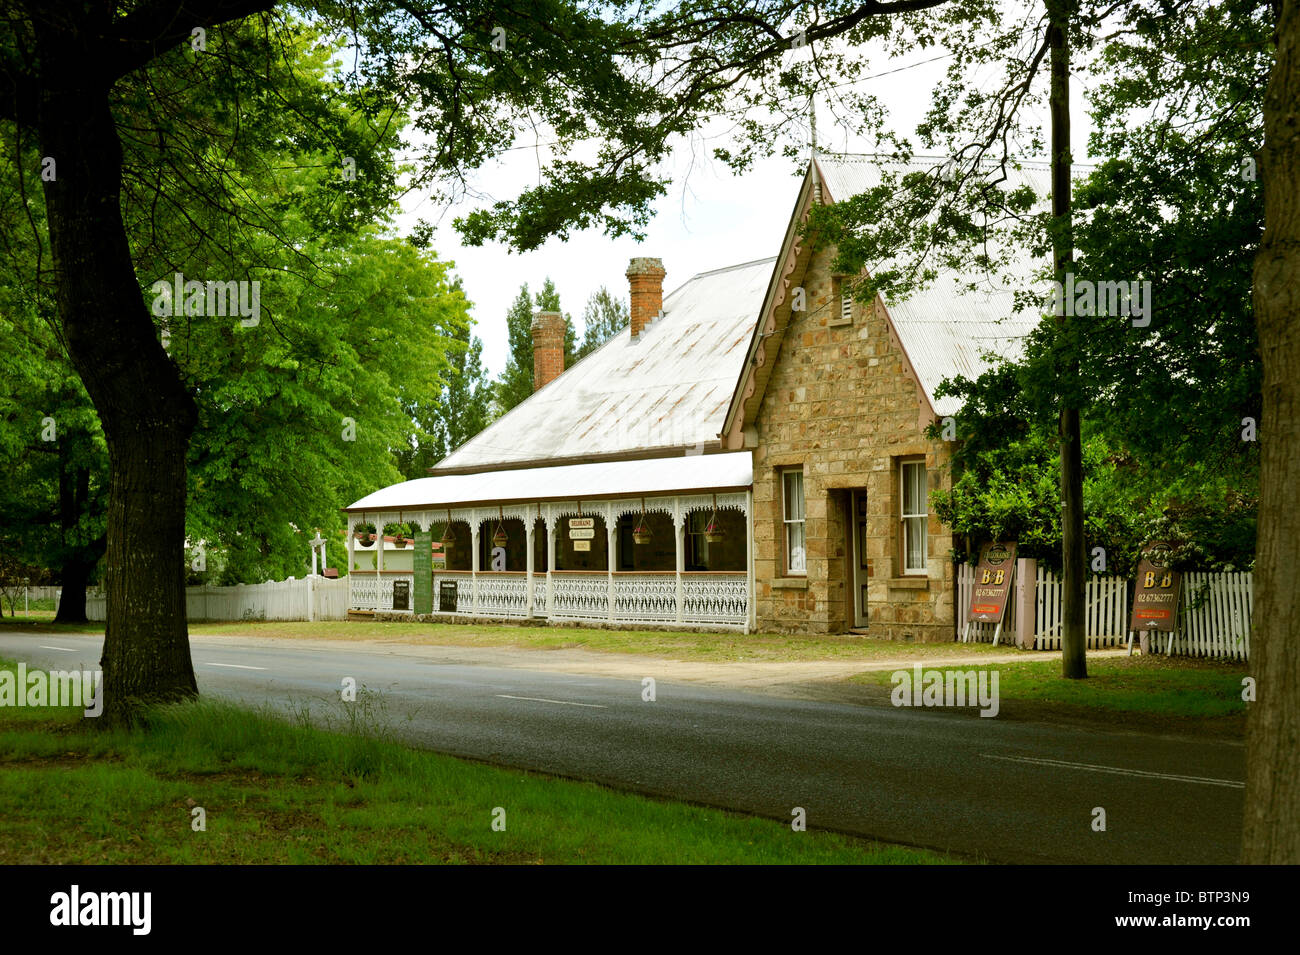 Deloraine's bed and breakfast Tenterfield NSW Australie Banque D'Images